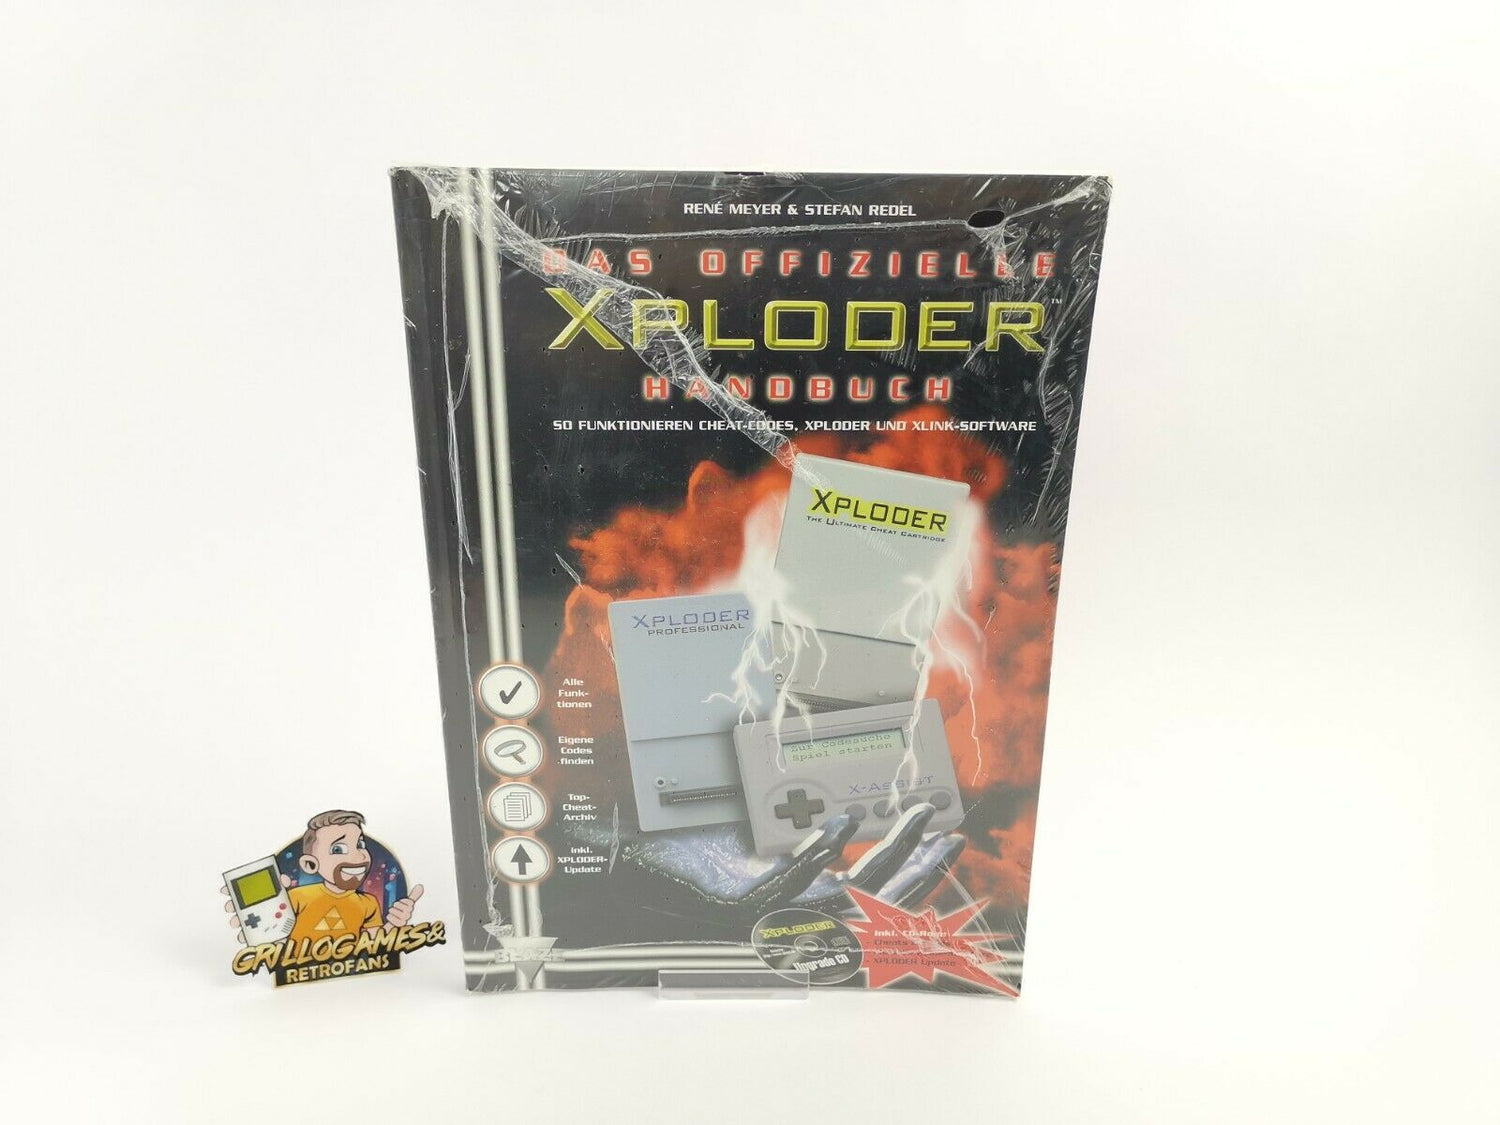 Sony Playstation 1 The Official Xploder Manual 